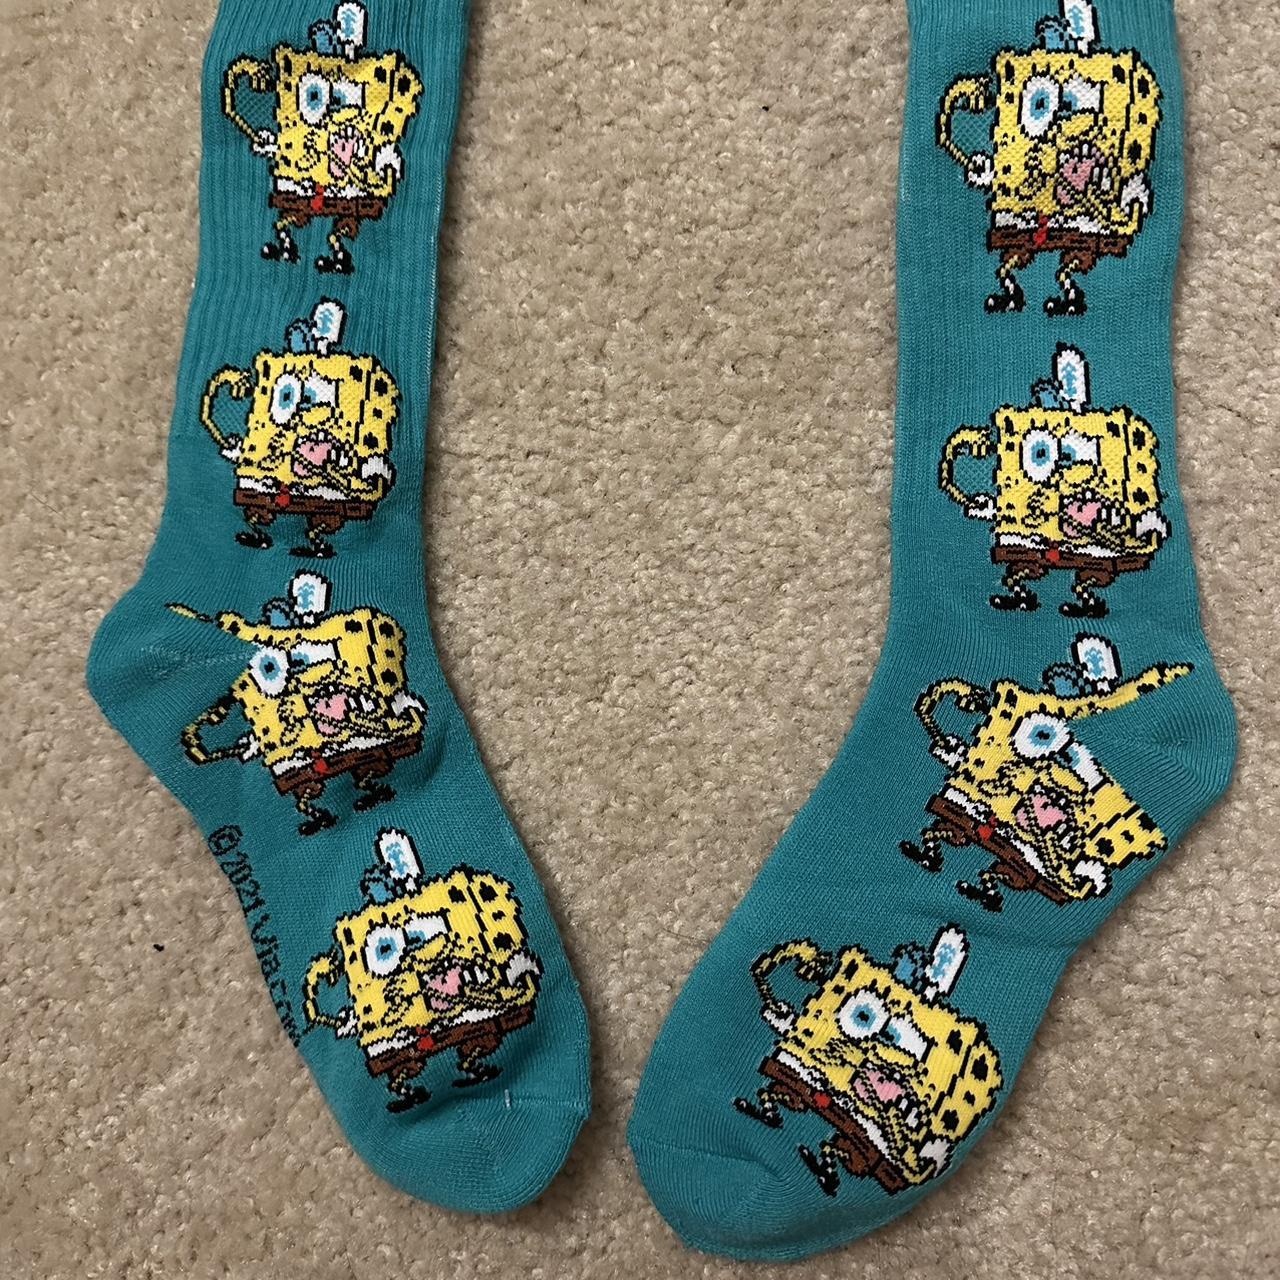 PacSun Men's Yellow and Green Socks